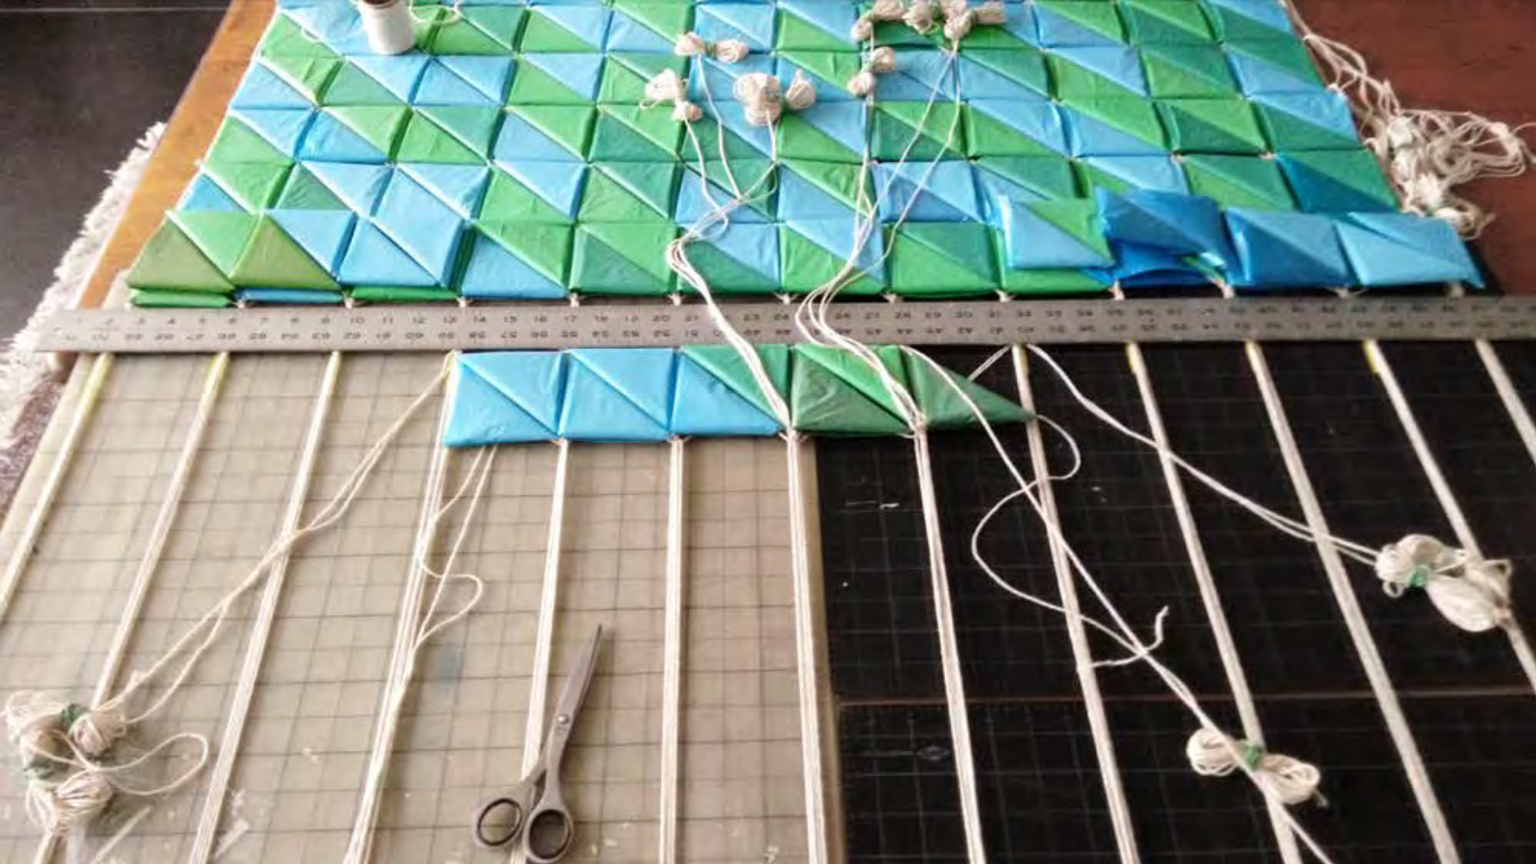 Tapestry formed of disposable plastic shopping bags and cotton twine, under construction